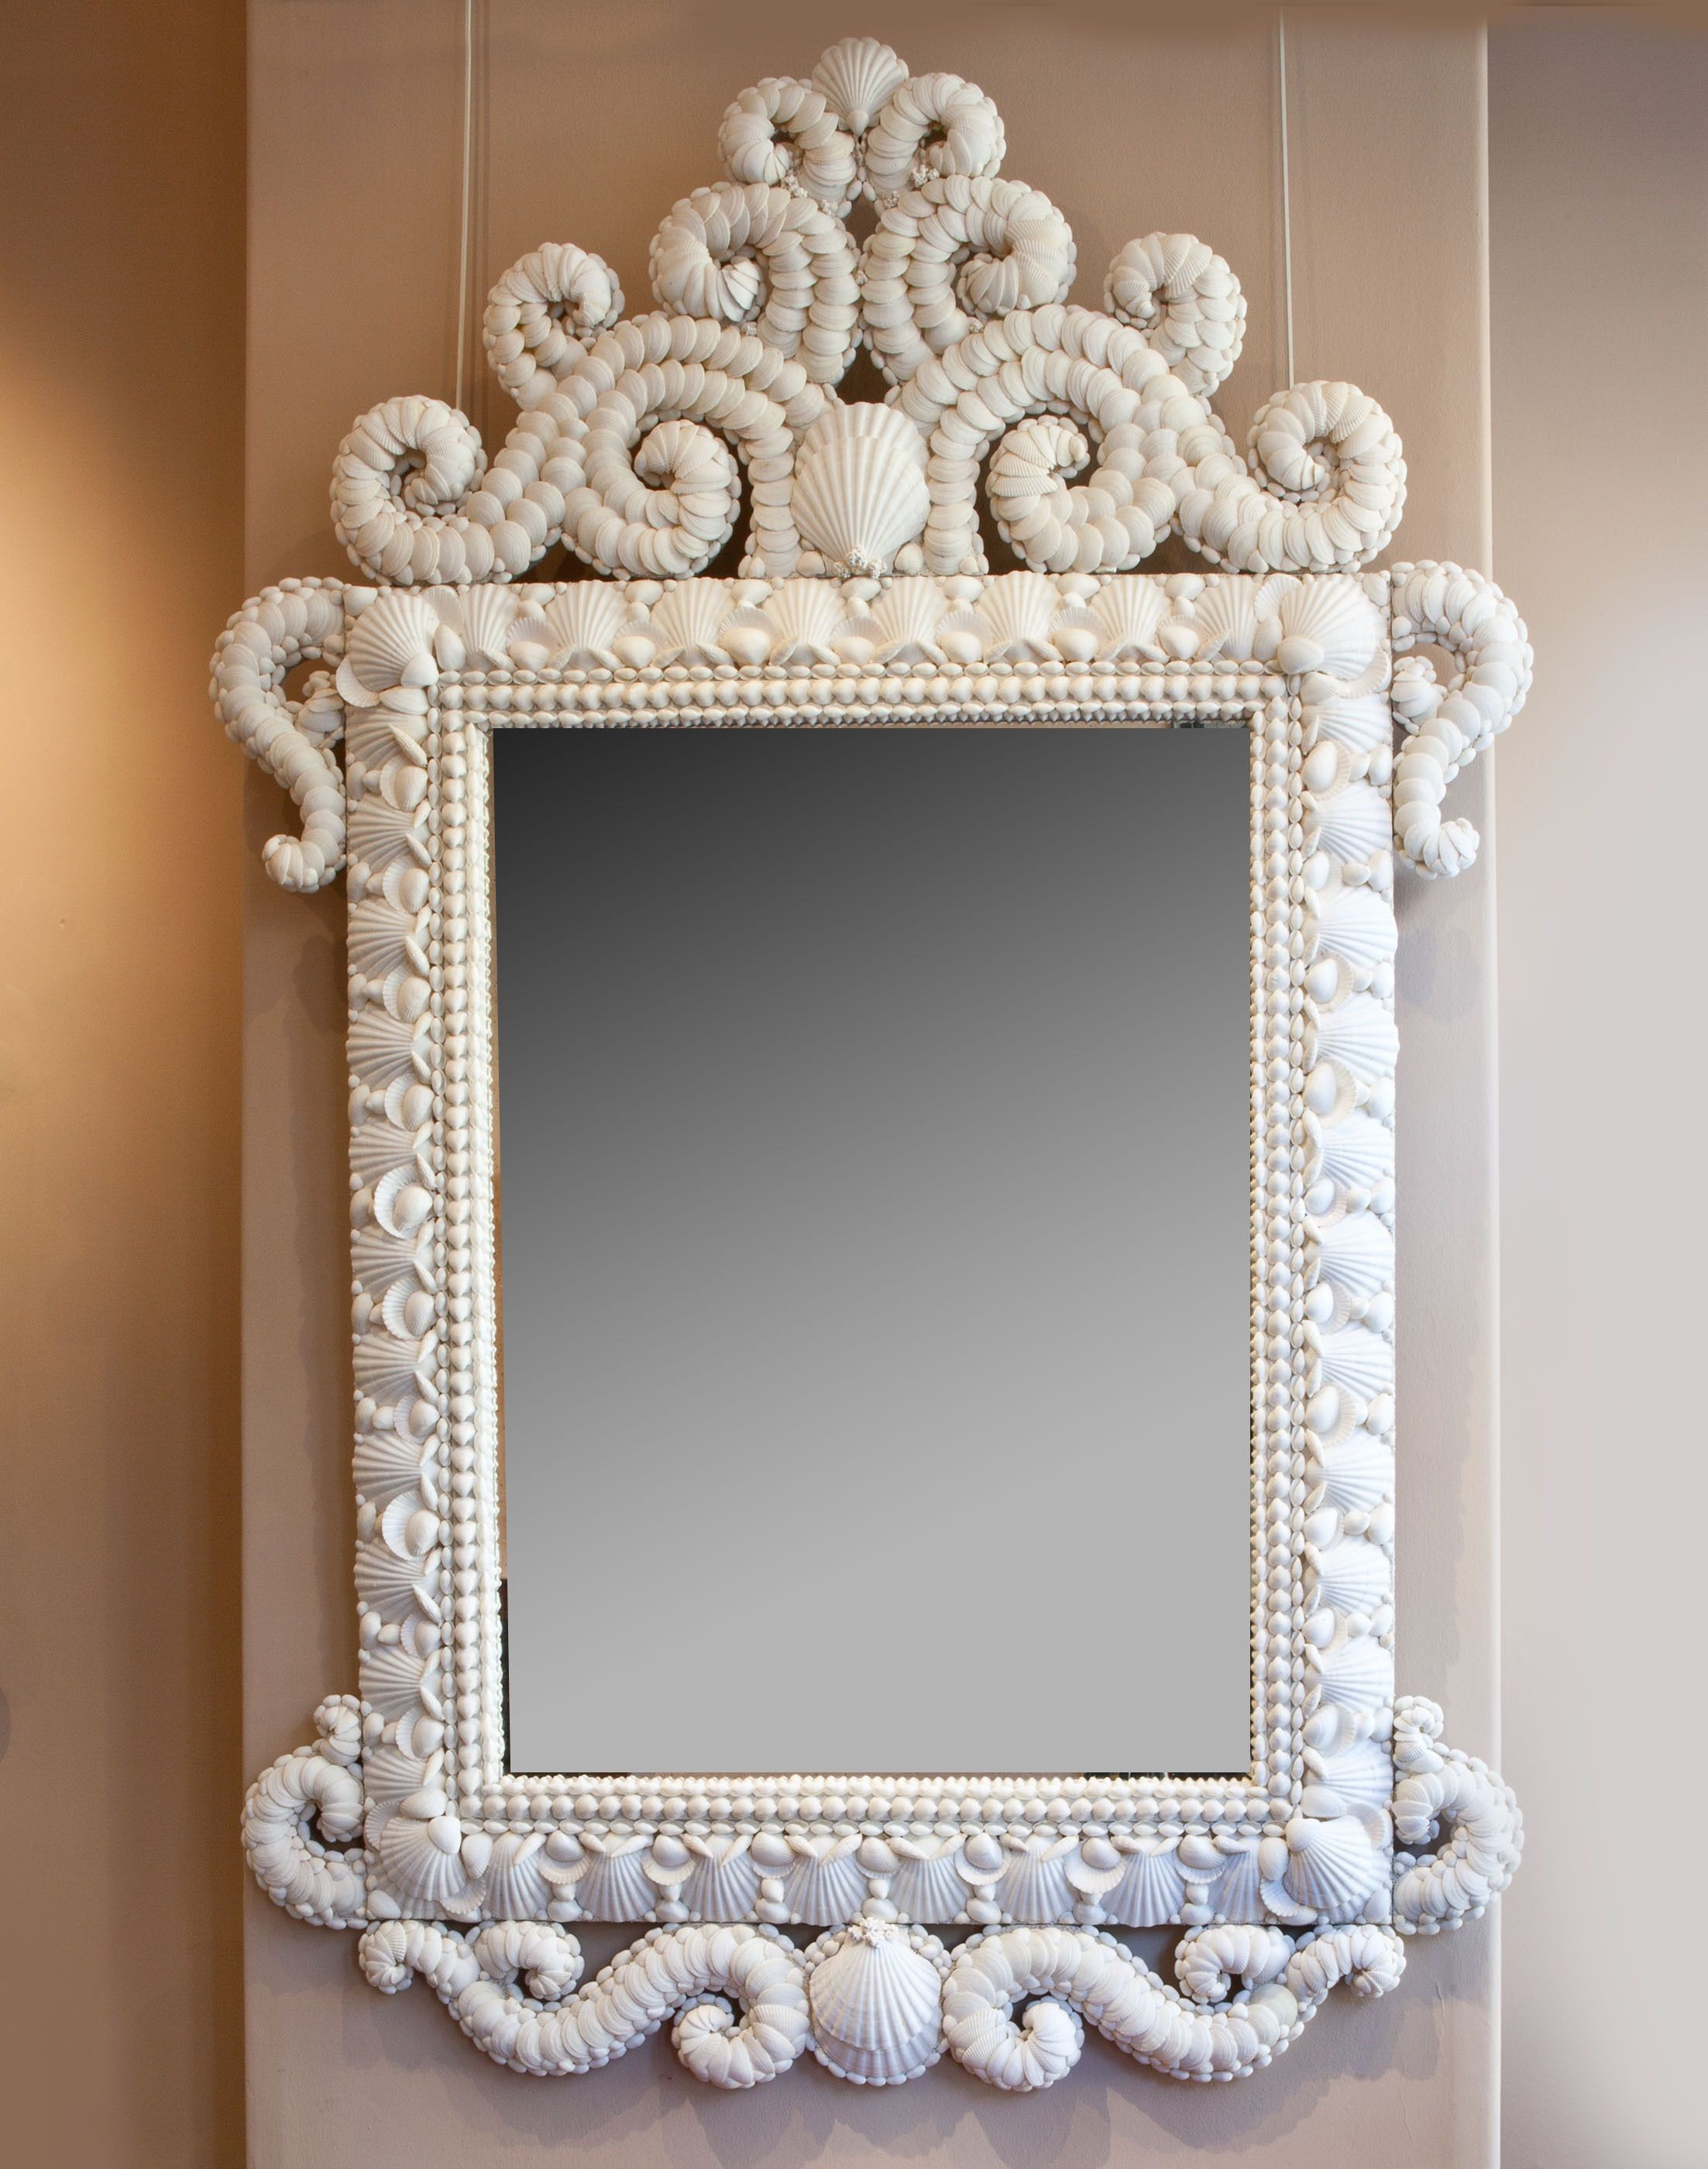 15 Recommended Mirror Cube Vase 2023 free download mirror cube vase of square mirror plates new a fine large scale white shell mirror pertaining to square mirror plates new a fine large scale white shell mirror nicholas wells antiques